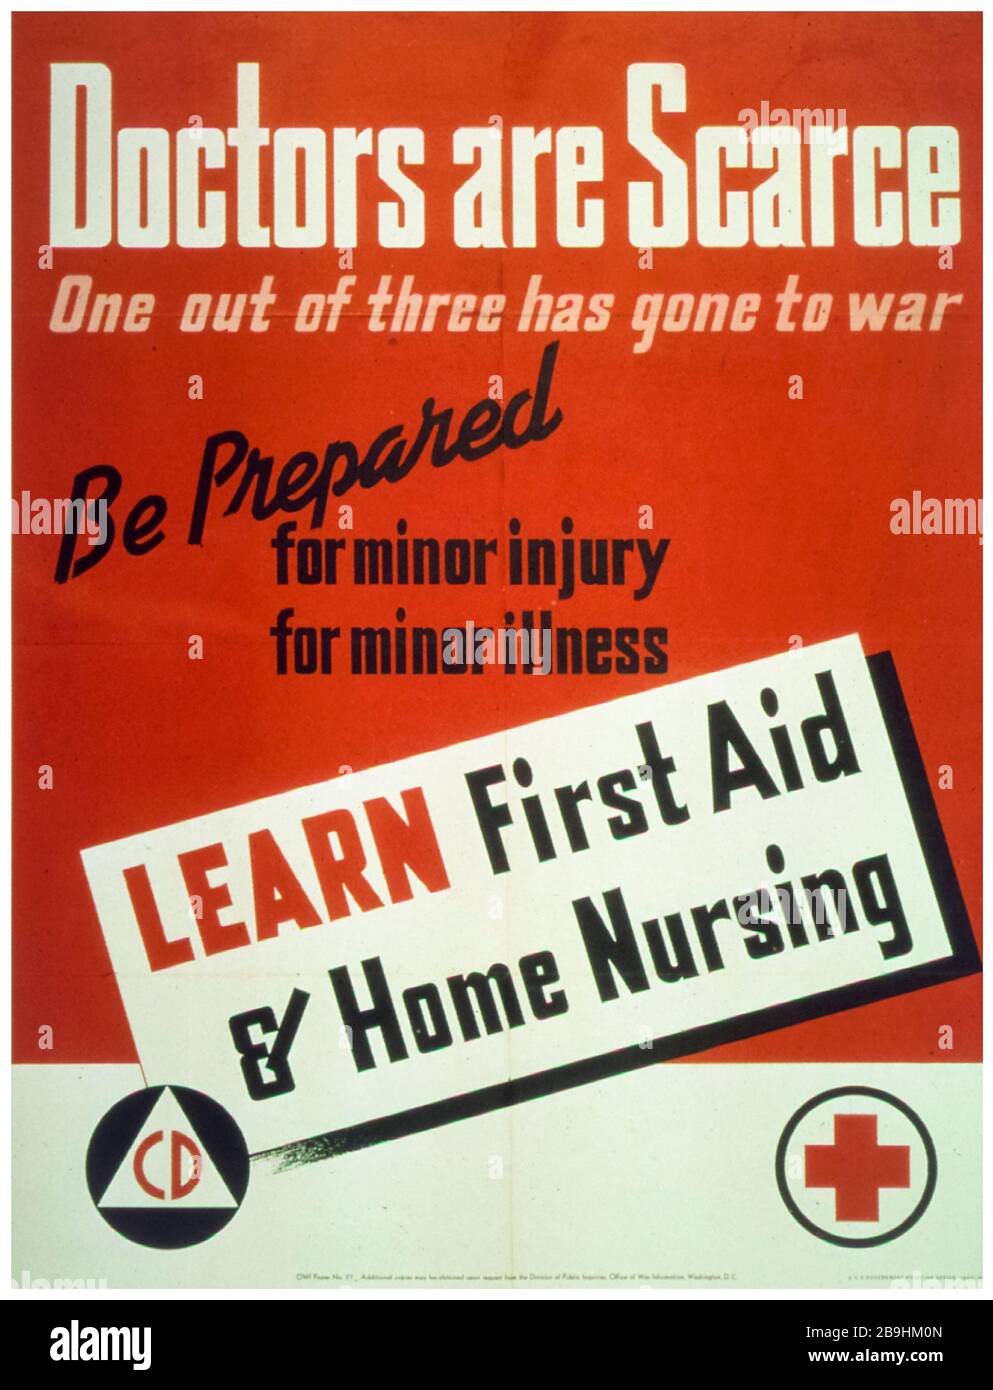 US WW2 Health campaign poster, Doctors are scarce, Learn First Aid and Home Nursing, 1941-1945 Stock Photo